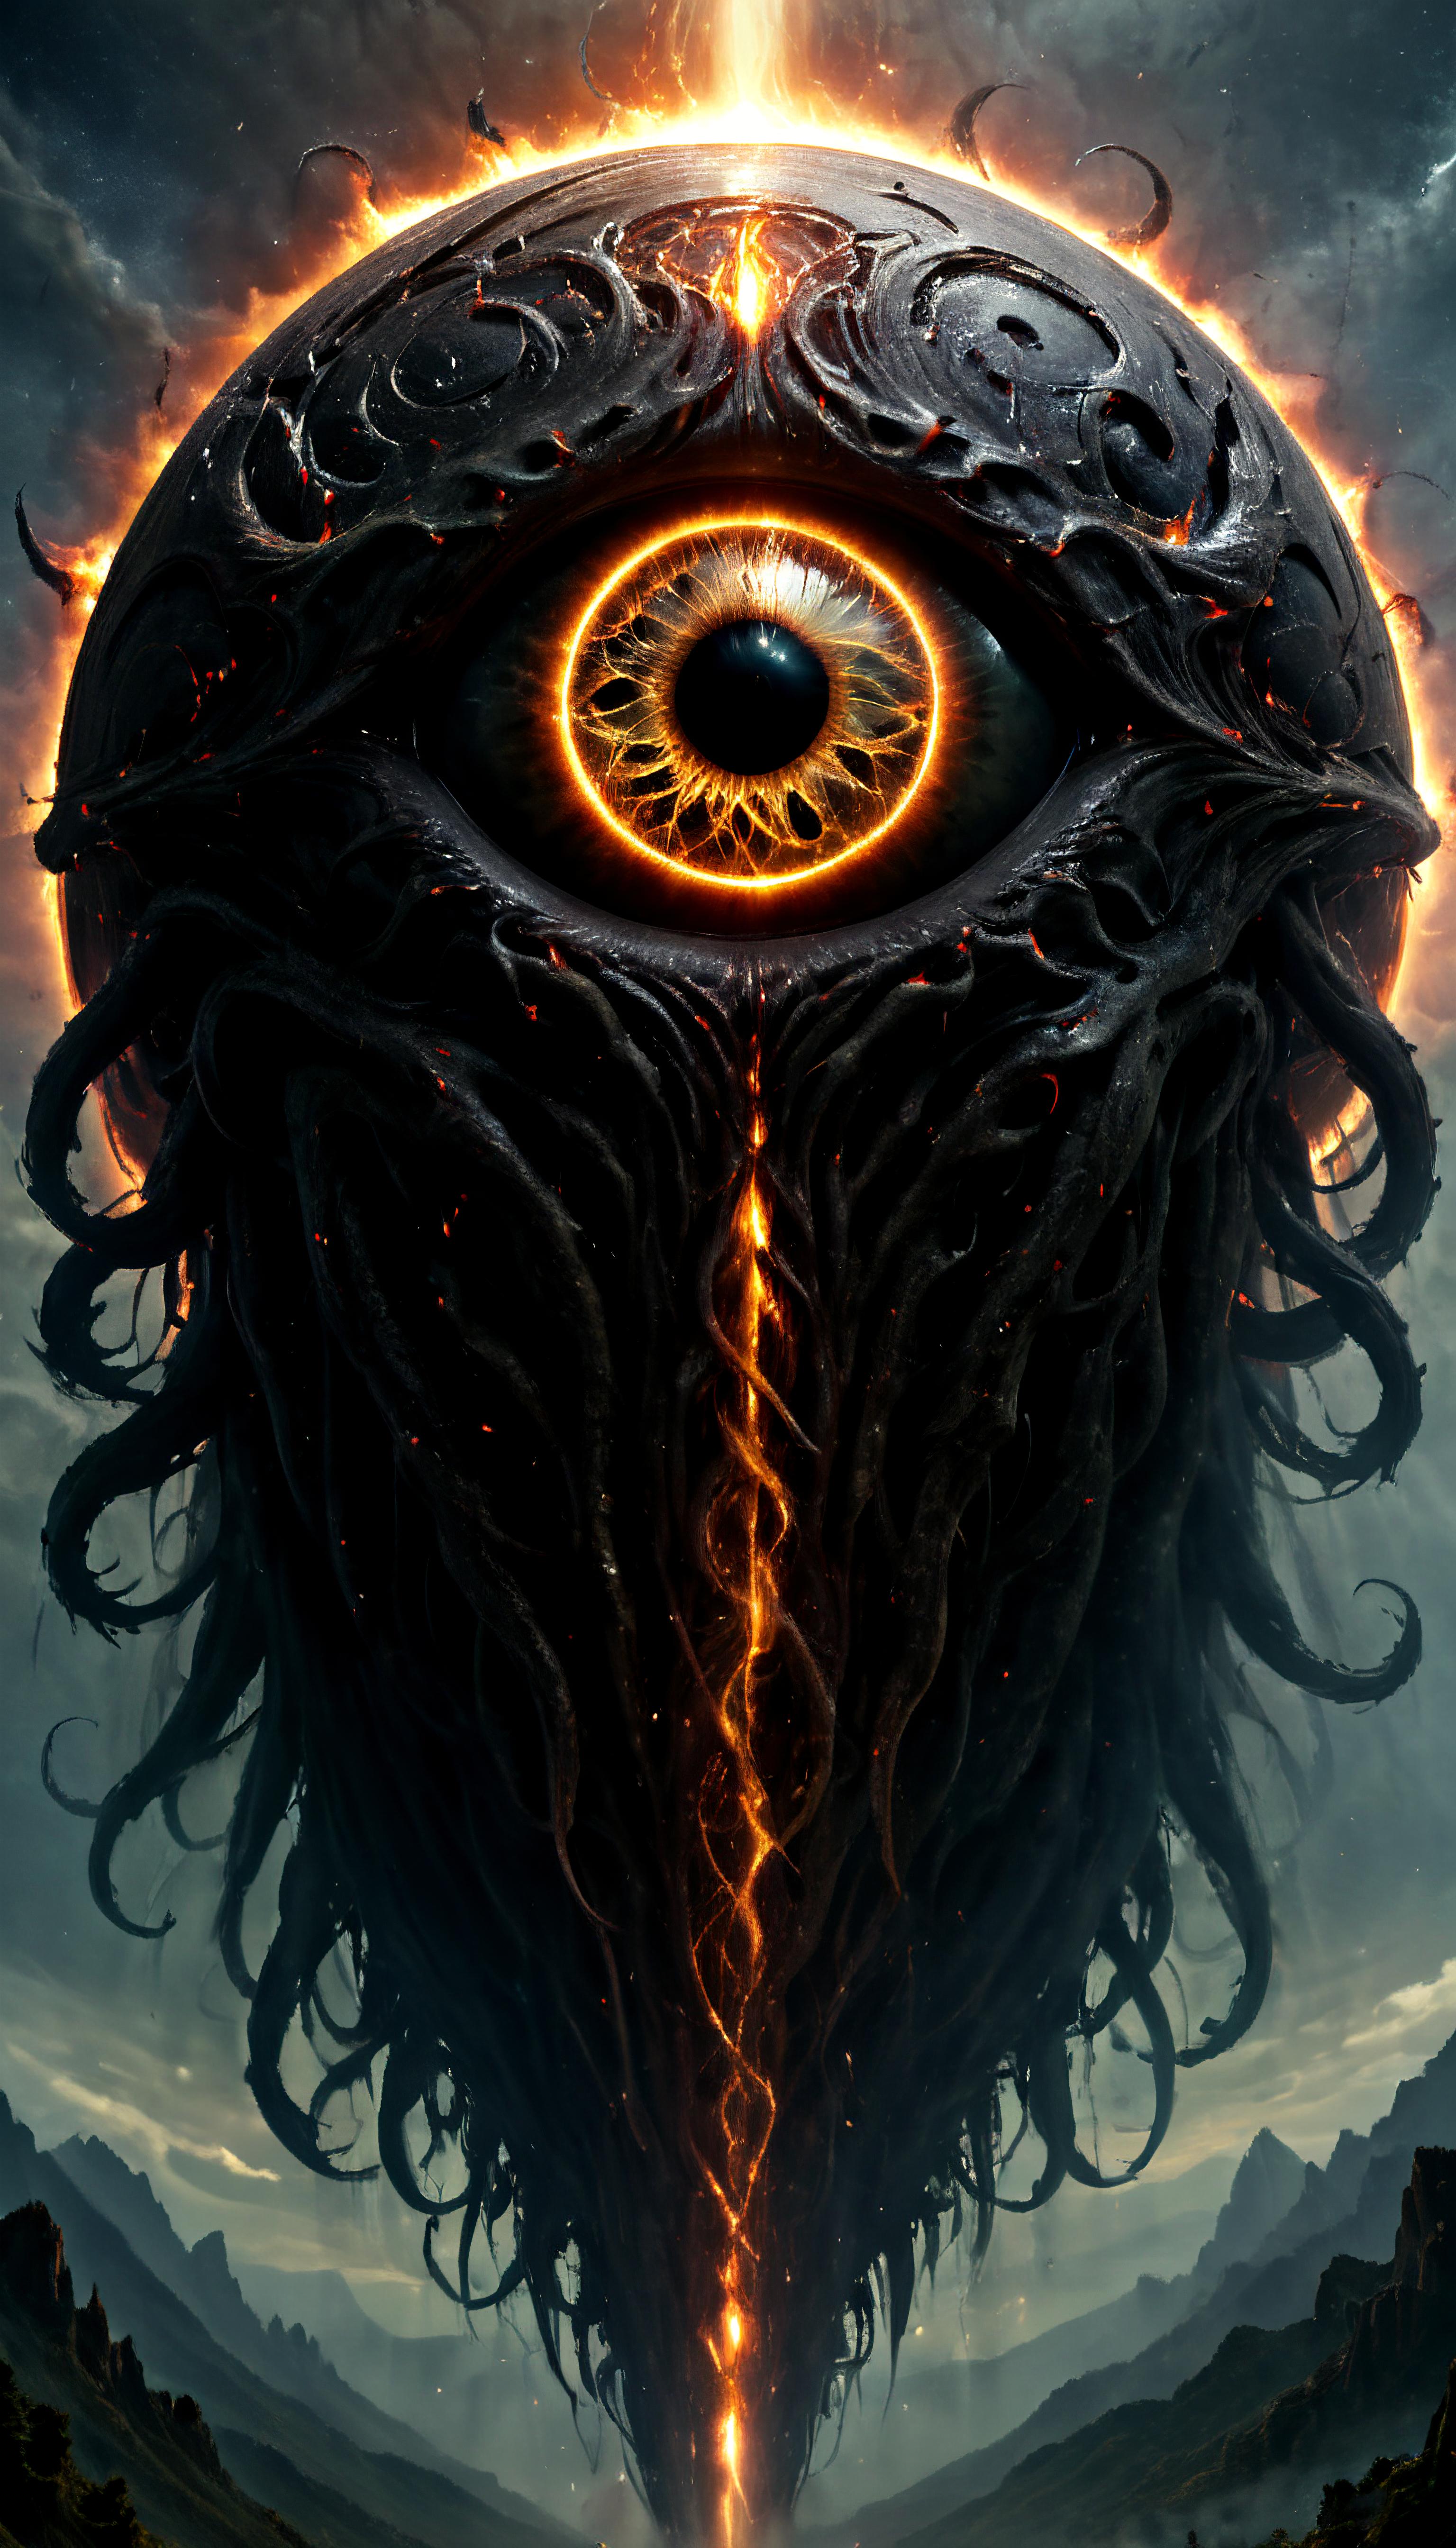 An Ancient Eye with a Giant Pupil in a Dark Setting